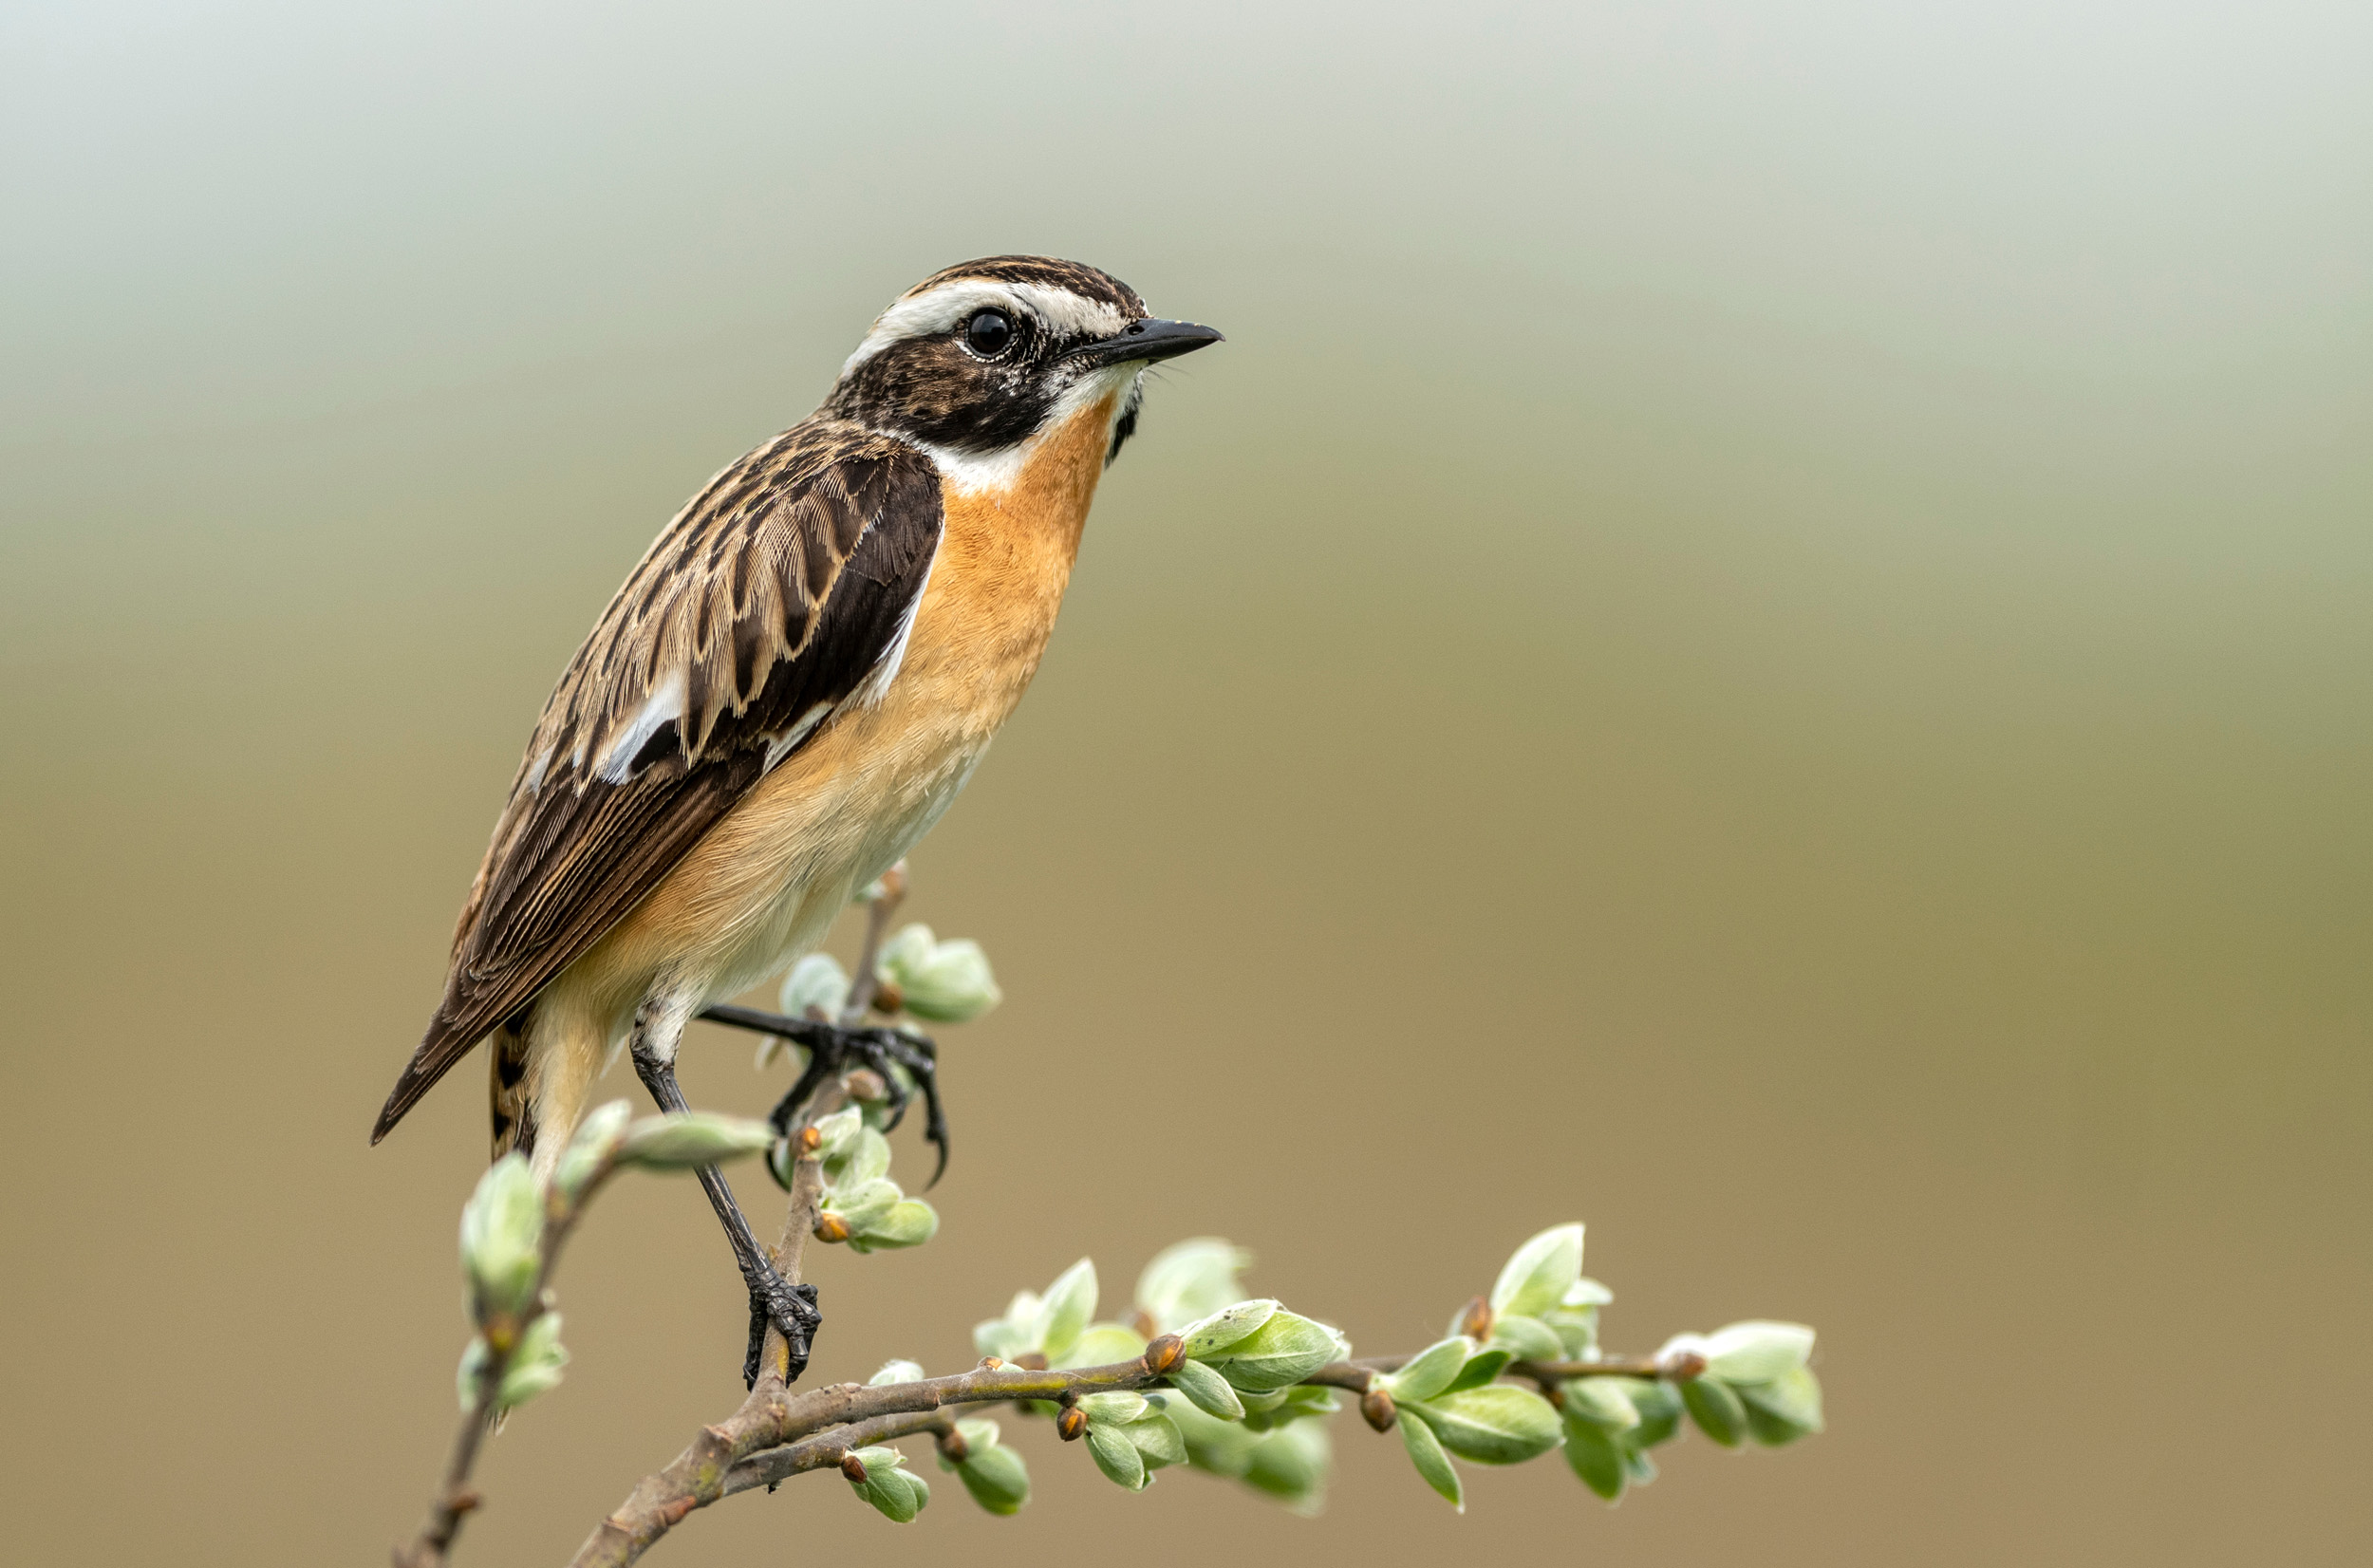 A male Whinchat stood on a tree branch.